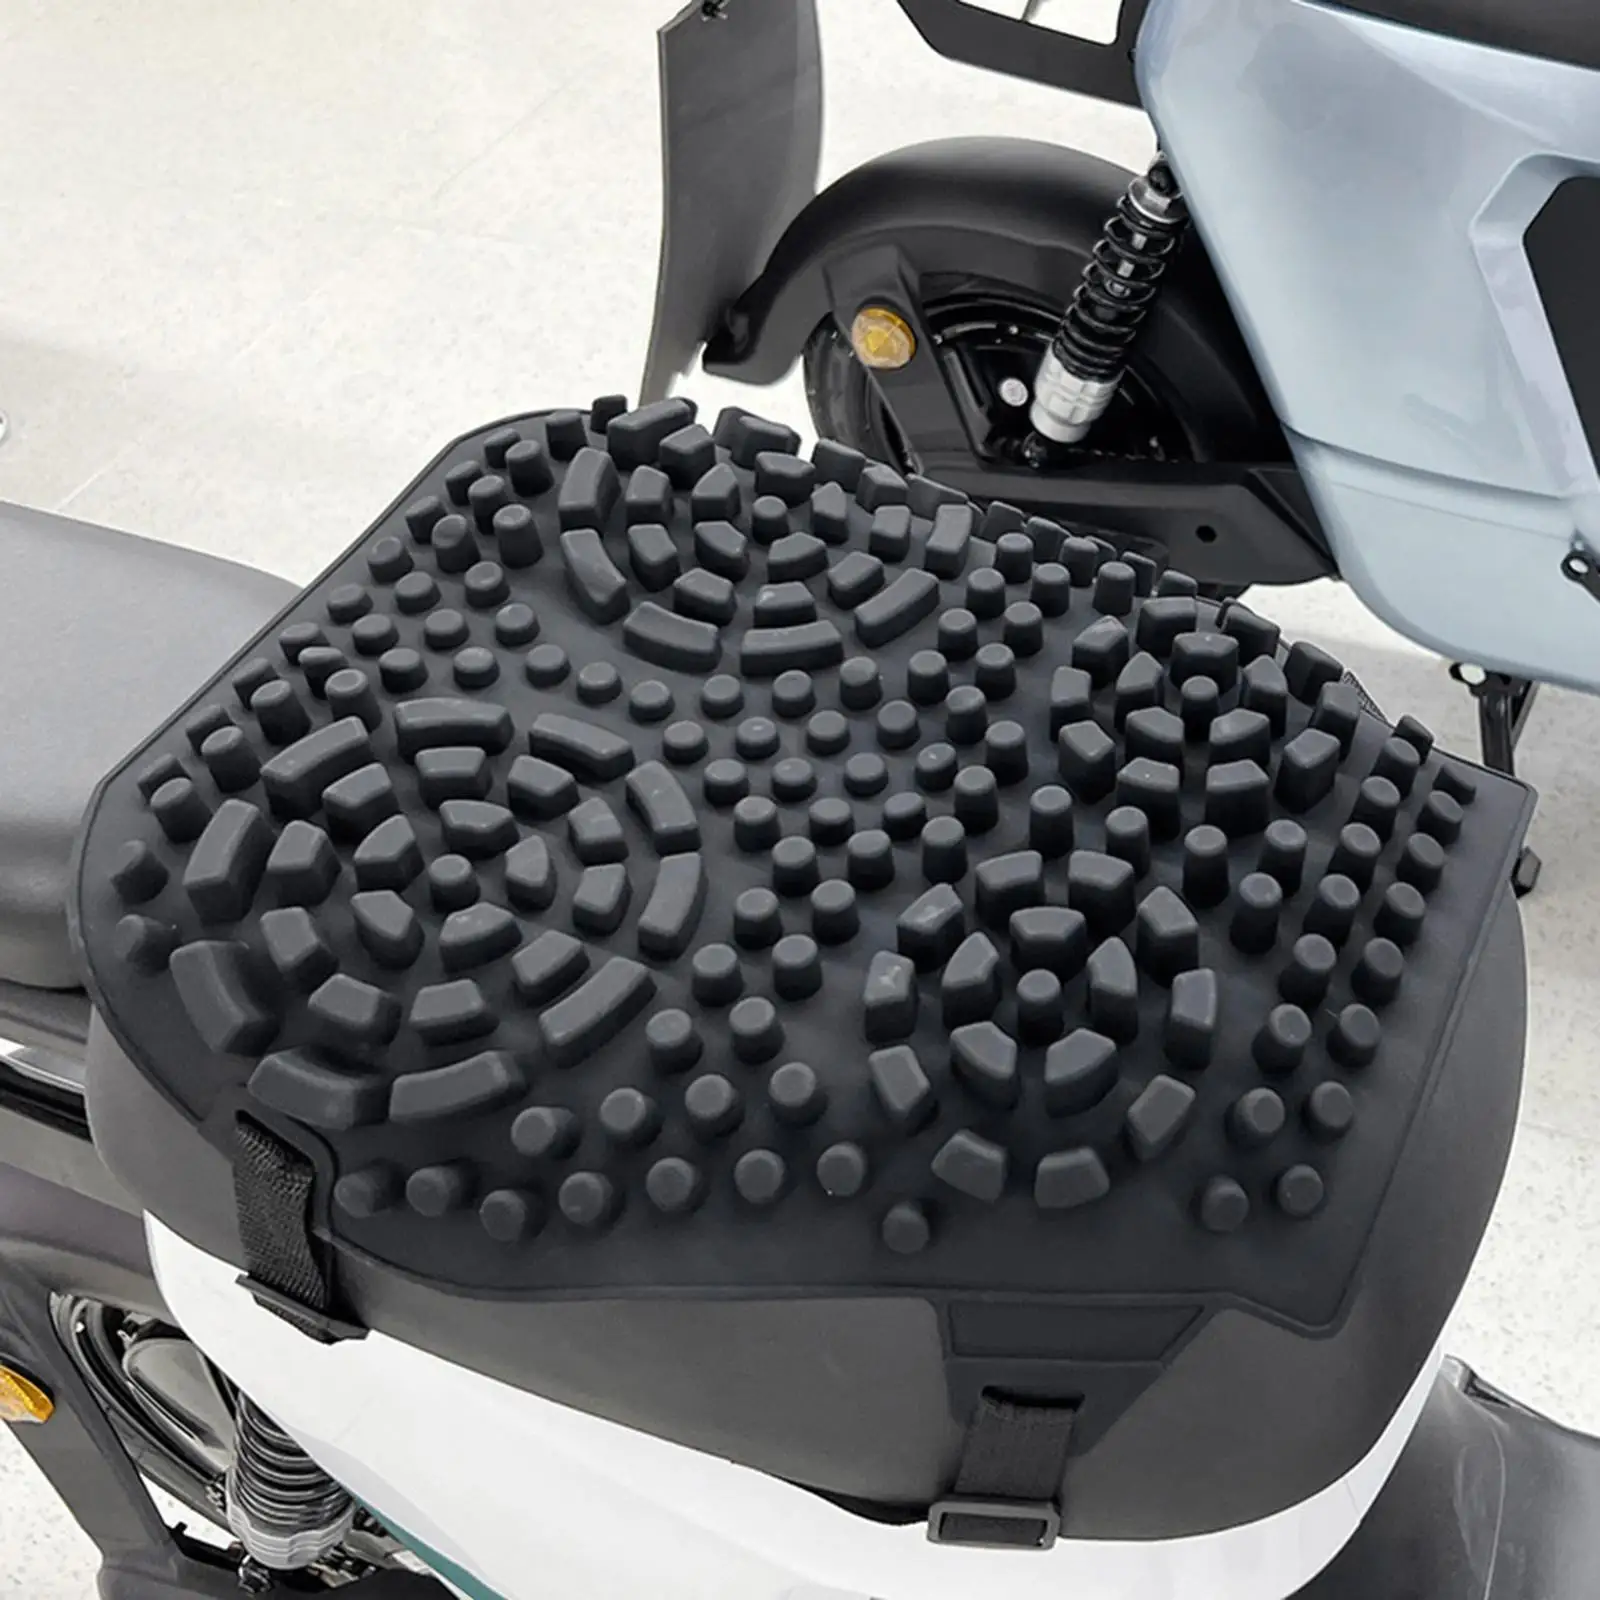  Seat Cushion SilicWaterproof Shock Absorption Anti  Ride Saddle Comfortable Breathable  Resistant Universal